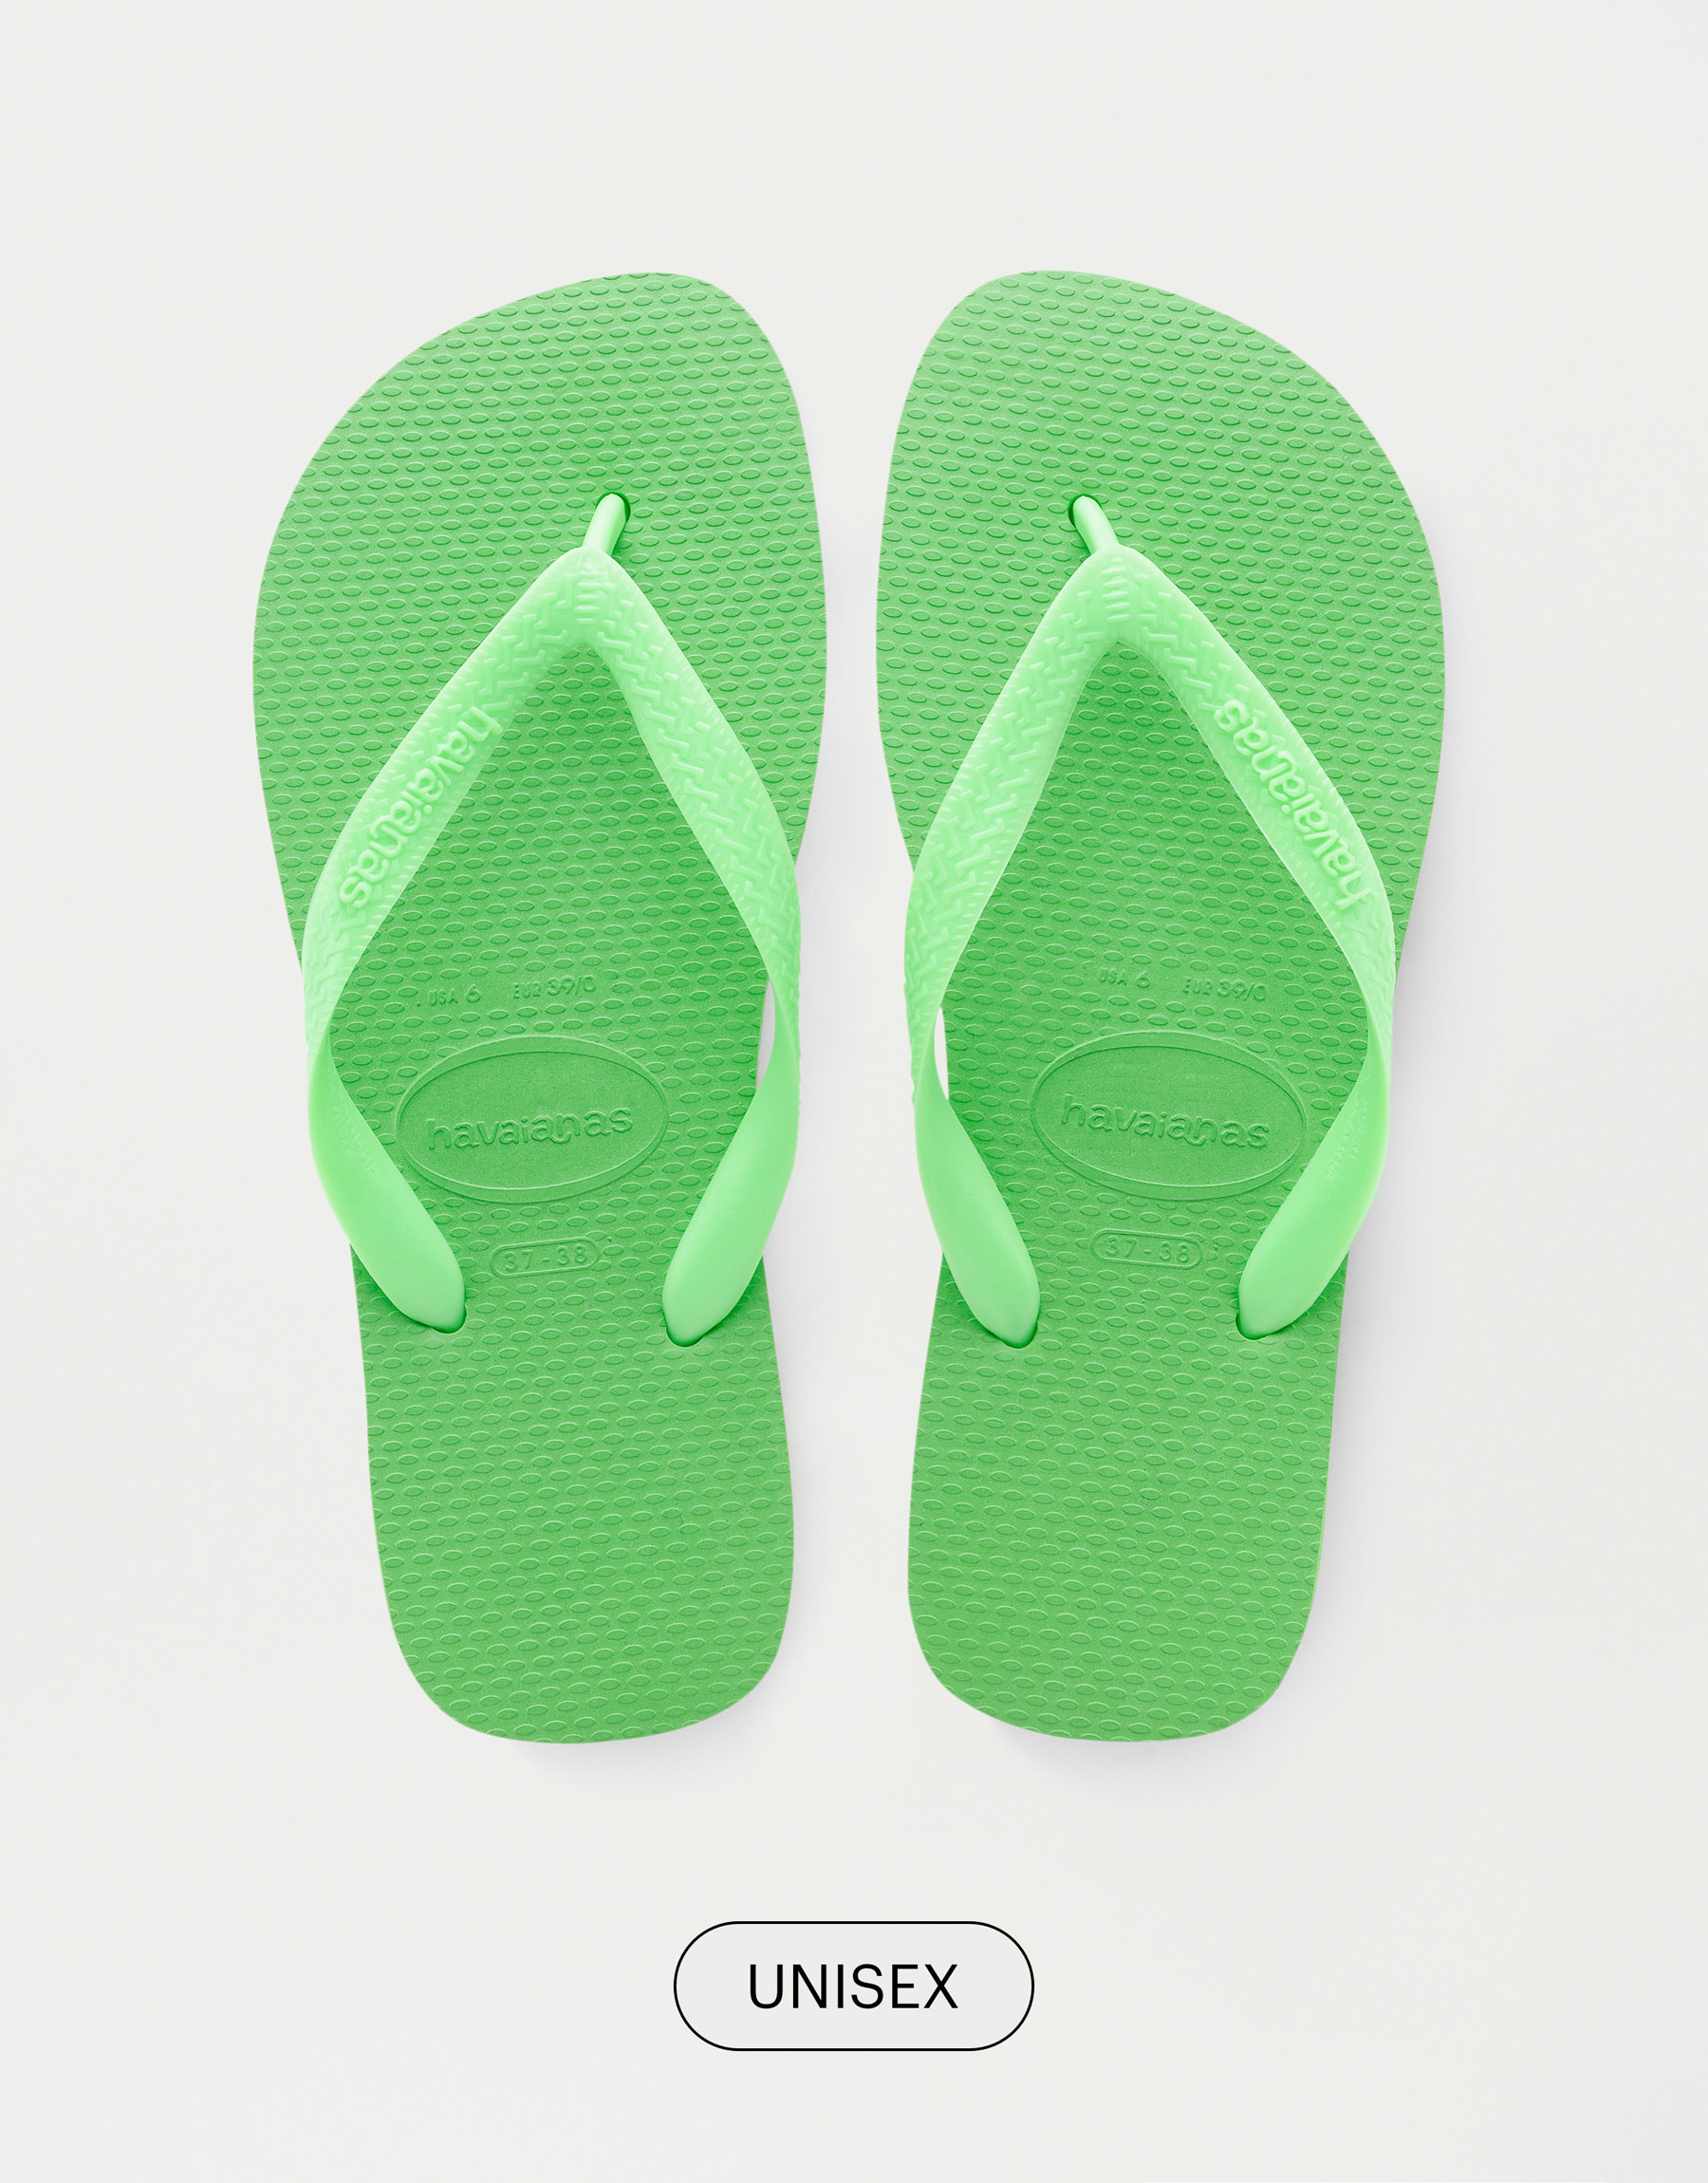 havaianas x pull and bear